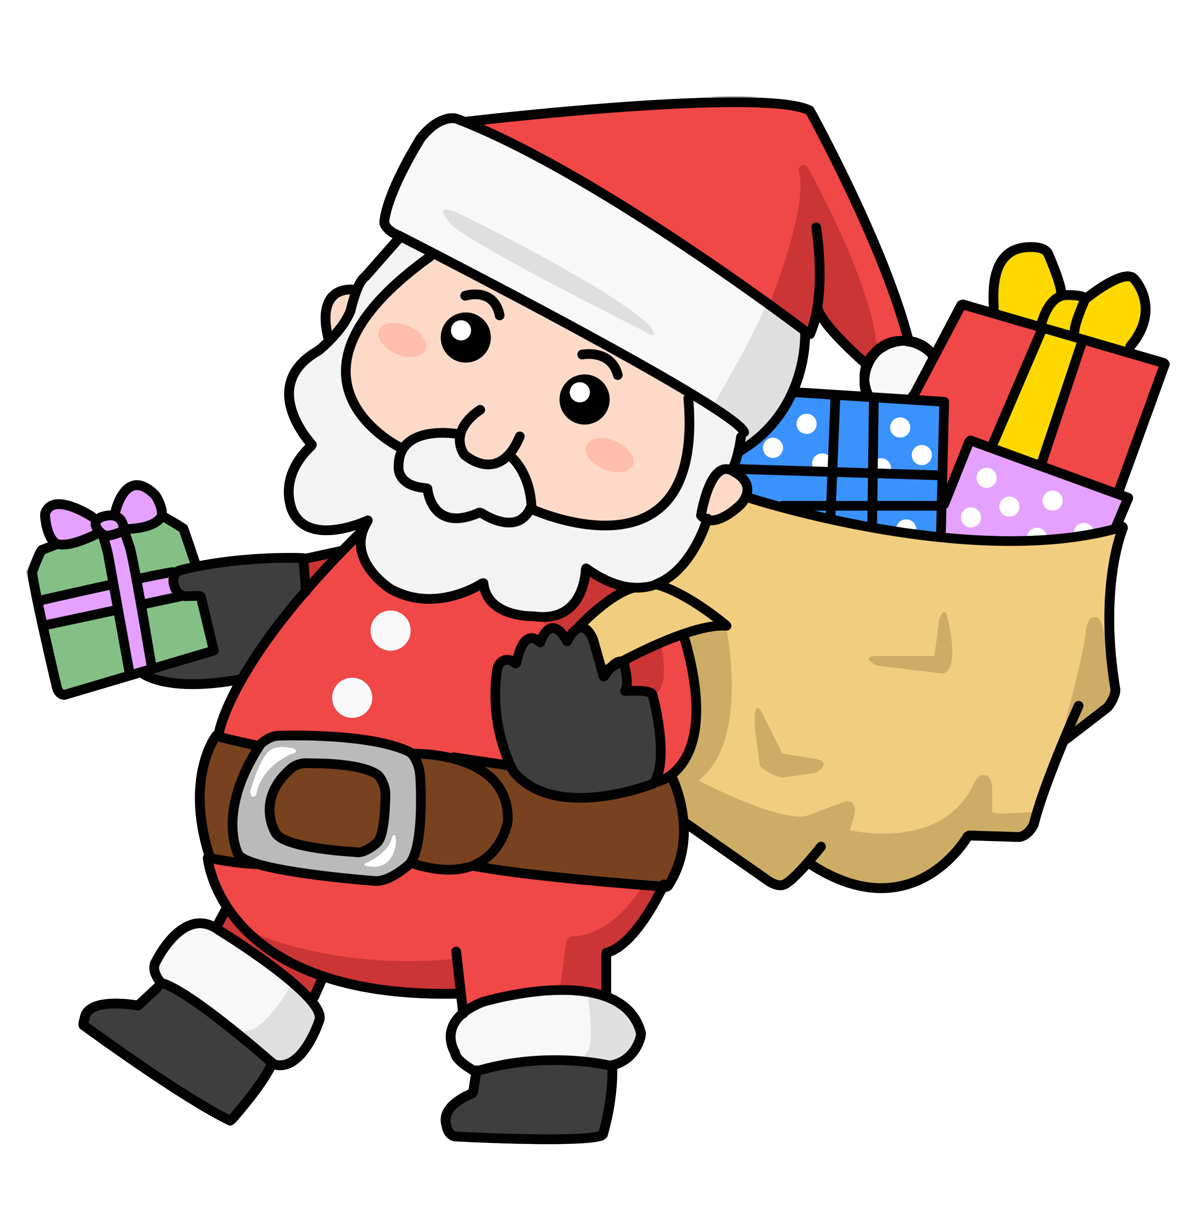 Free to Use & Public Domain Christmas Clip Art - Page 4